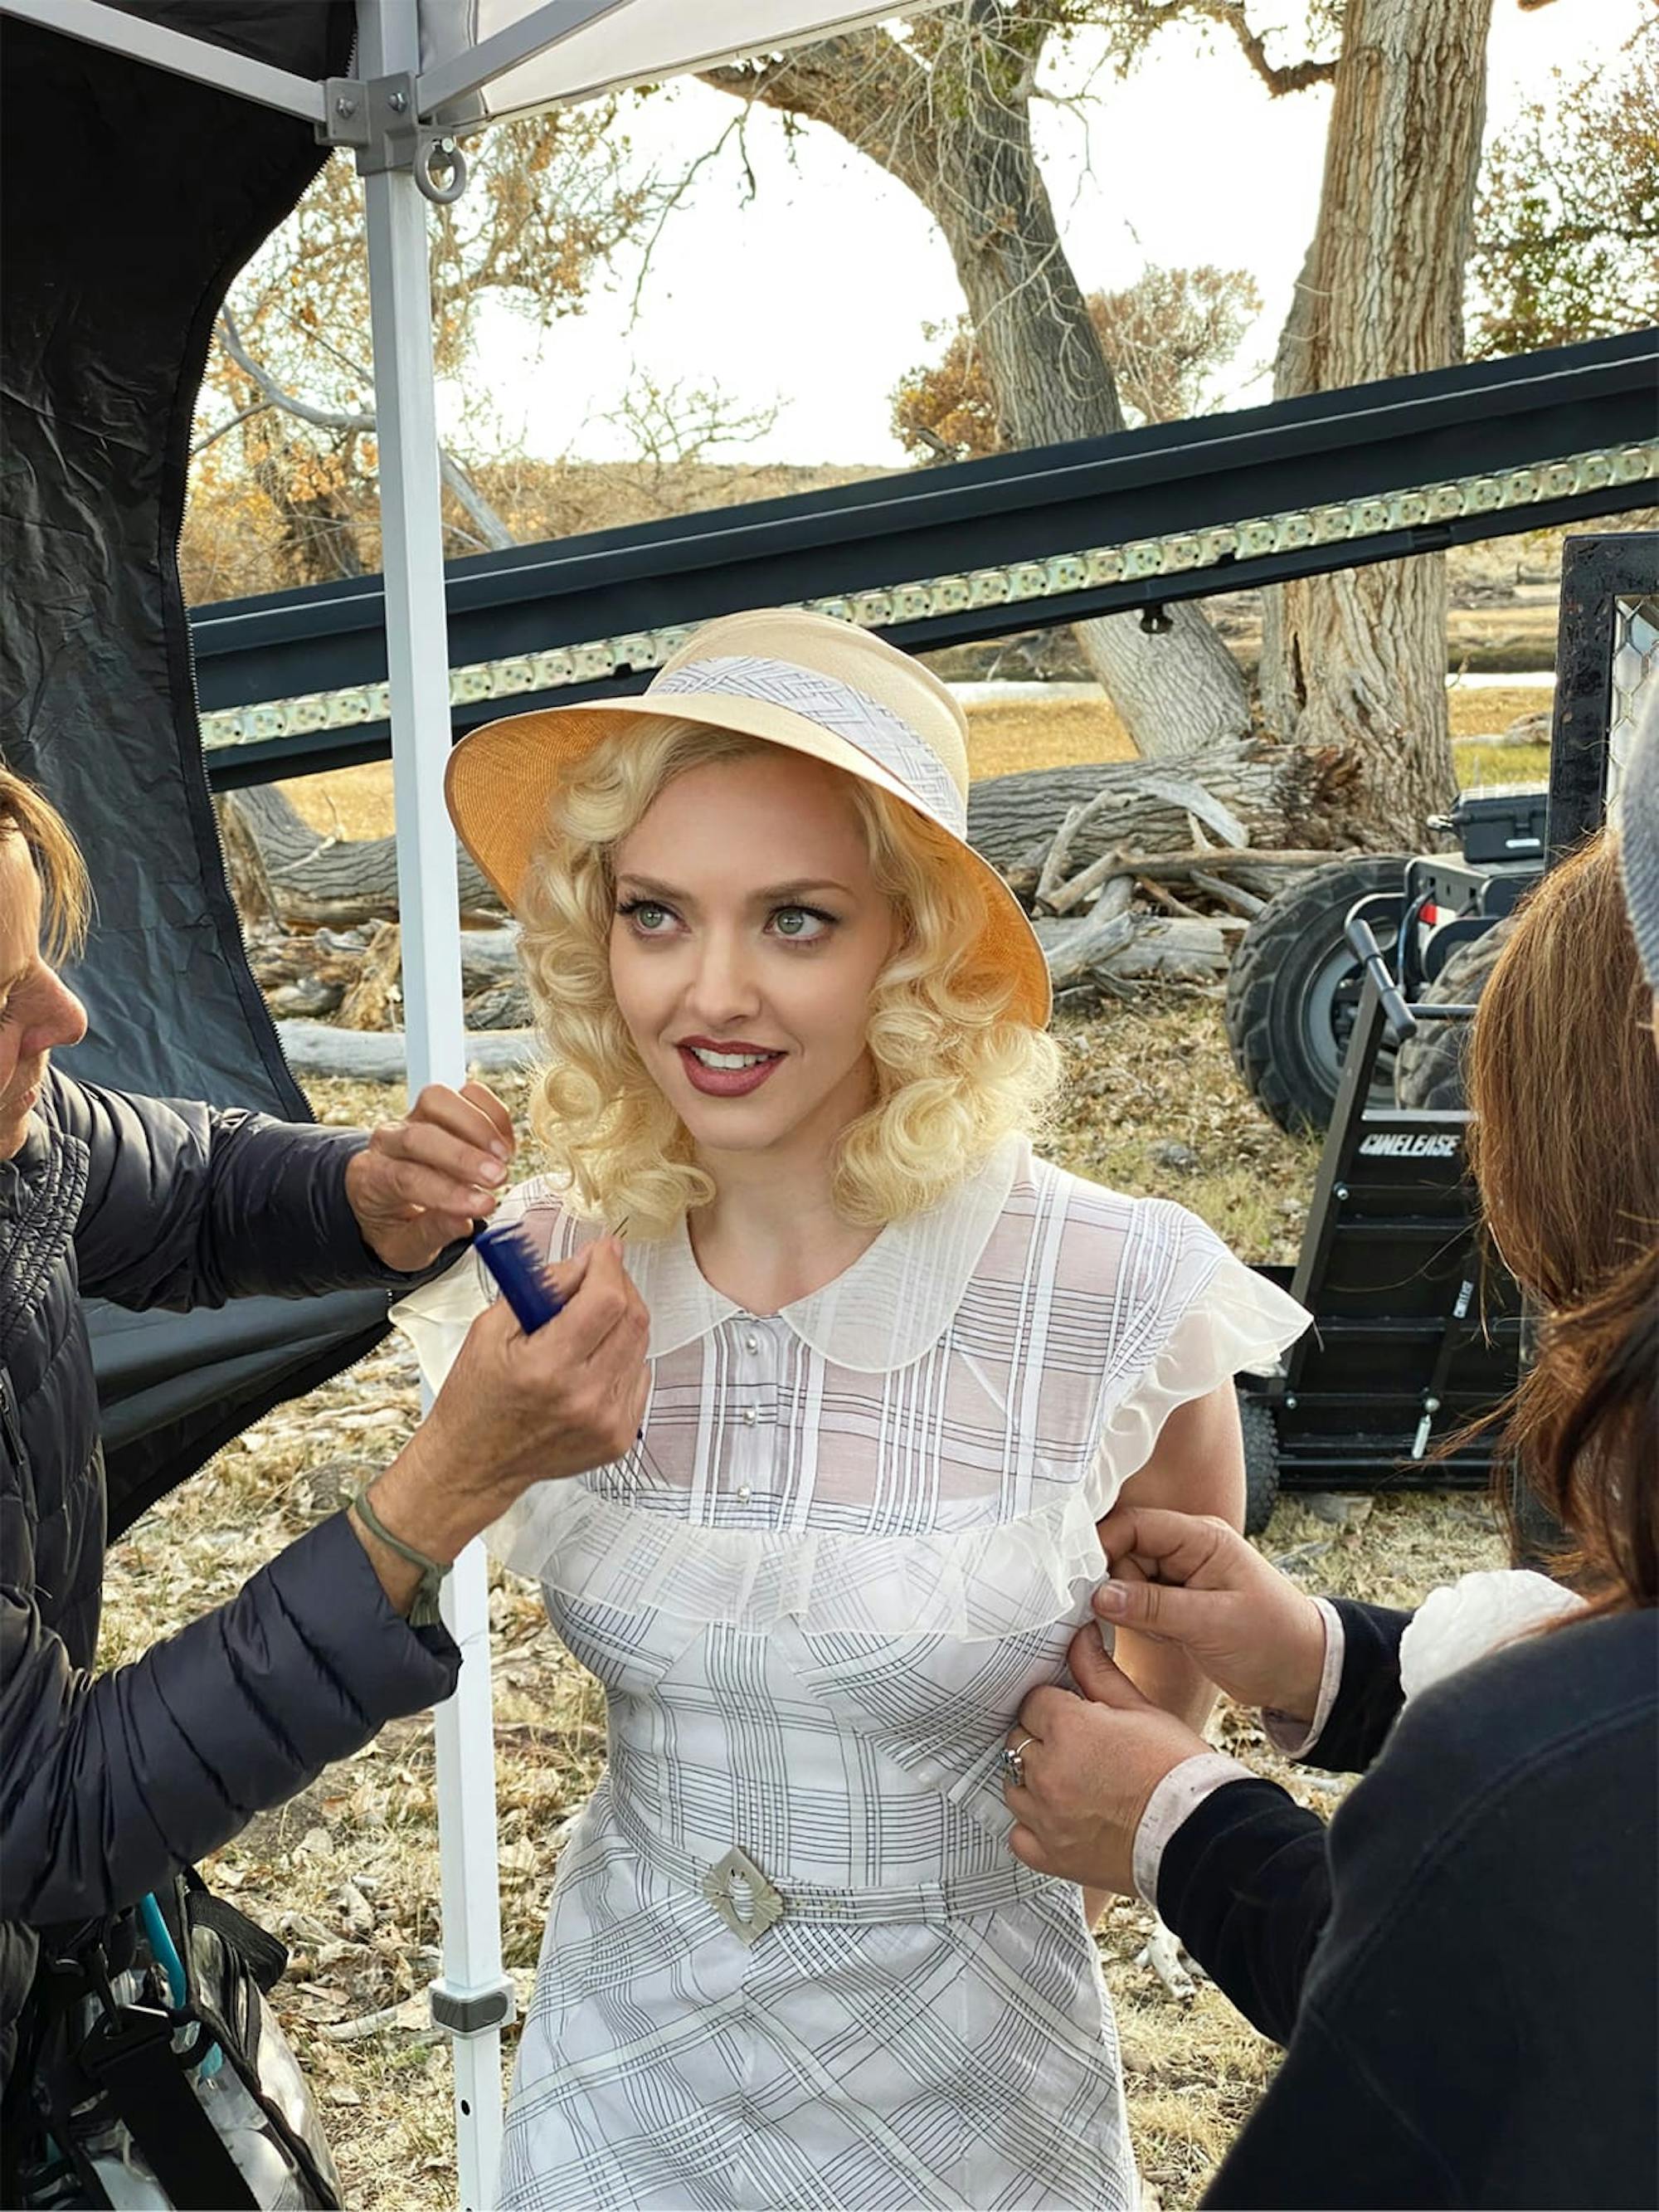 Amanda Seyfried in costume. She has straw-yellow locks, which are being combed as we speak, and is wearing a white dress, which appears to be getting it’s final alterations. 